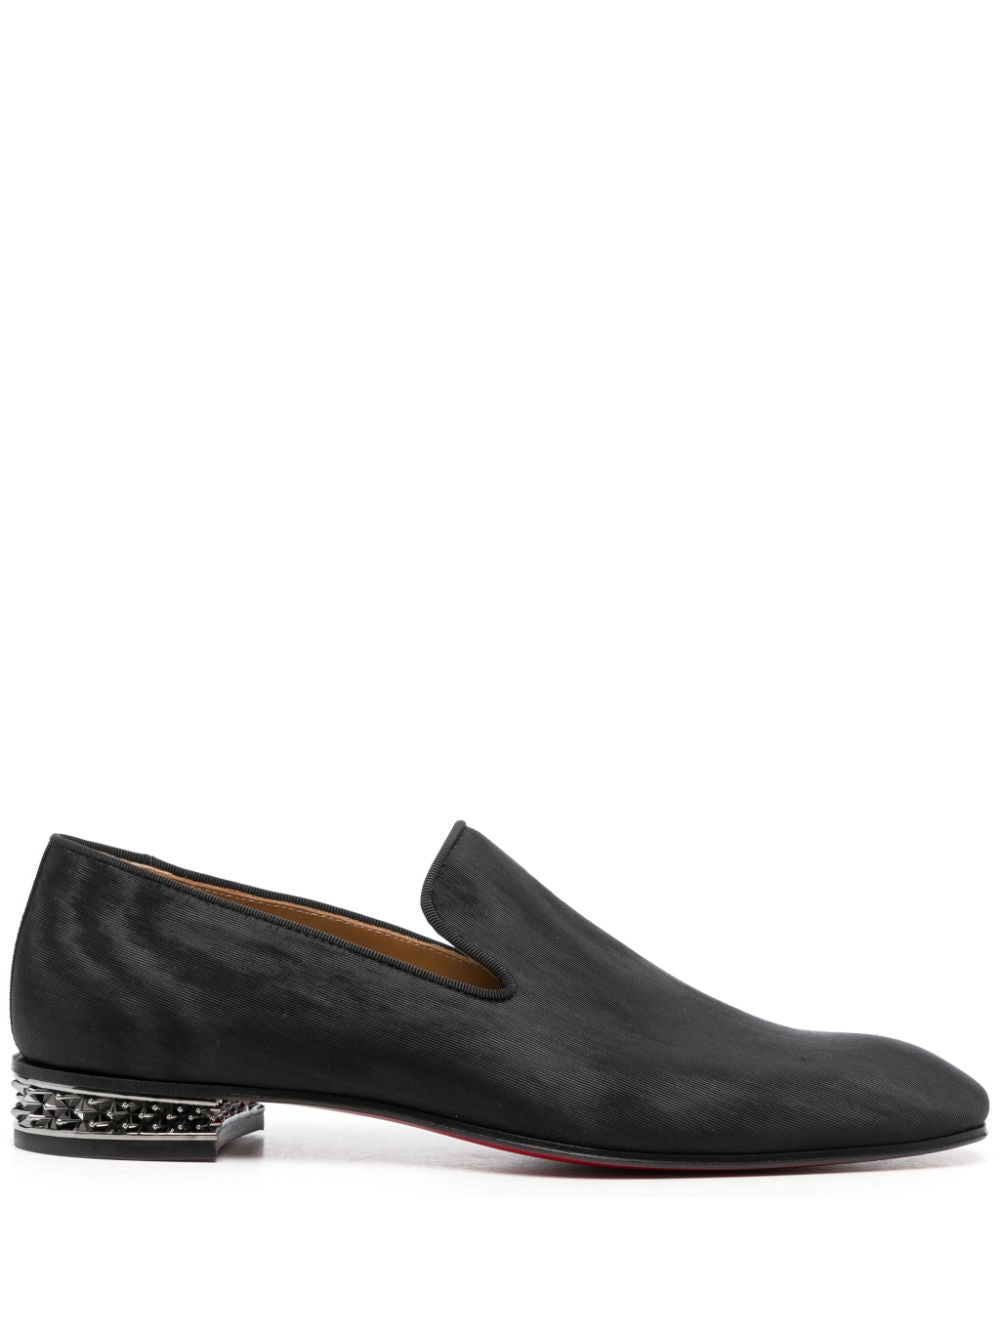 Dandy Rock Leather Loafers for Men - FW23